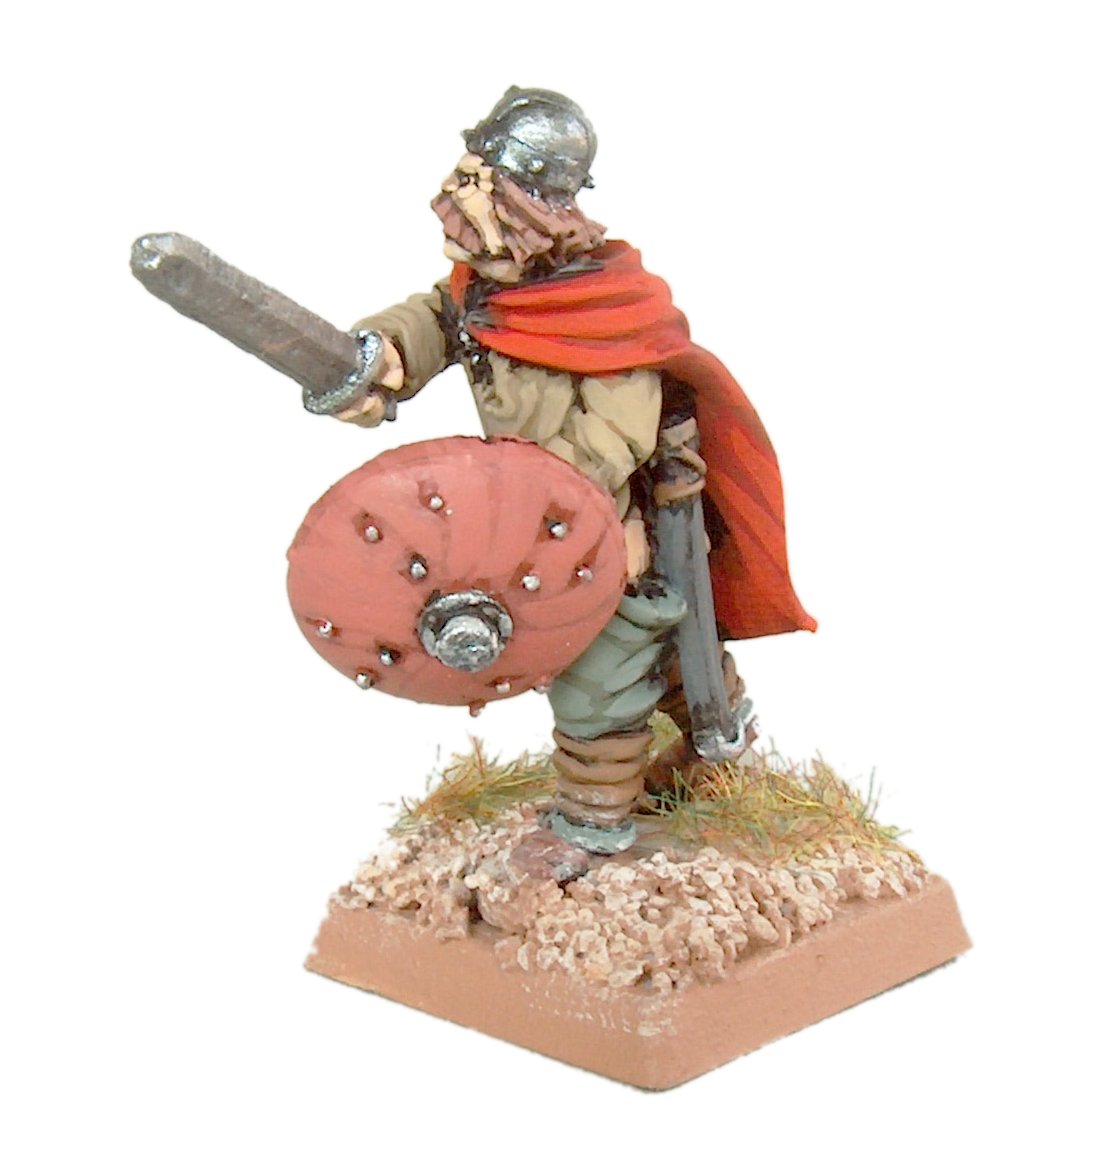 a miniature warrior stands on his sword and shield